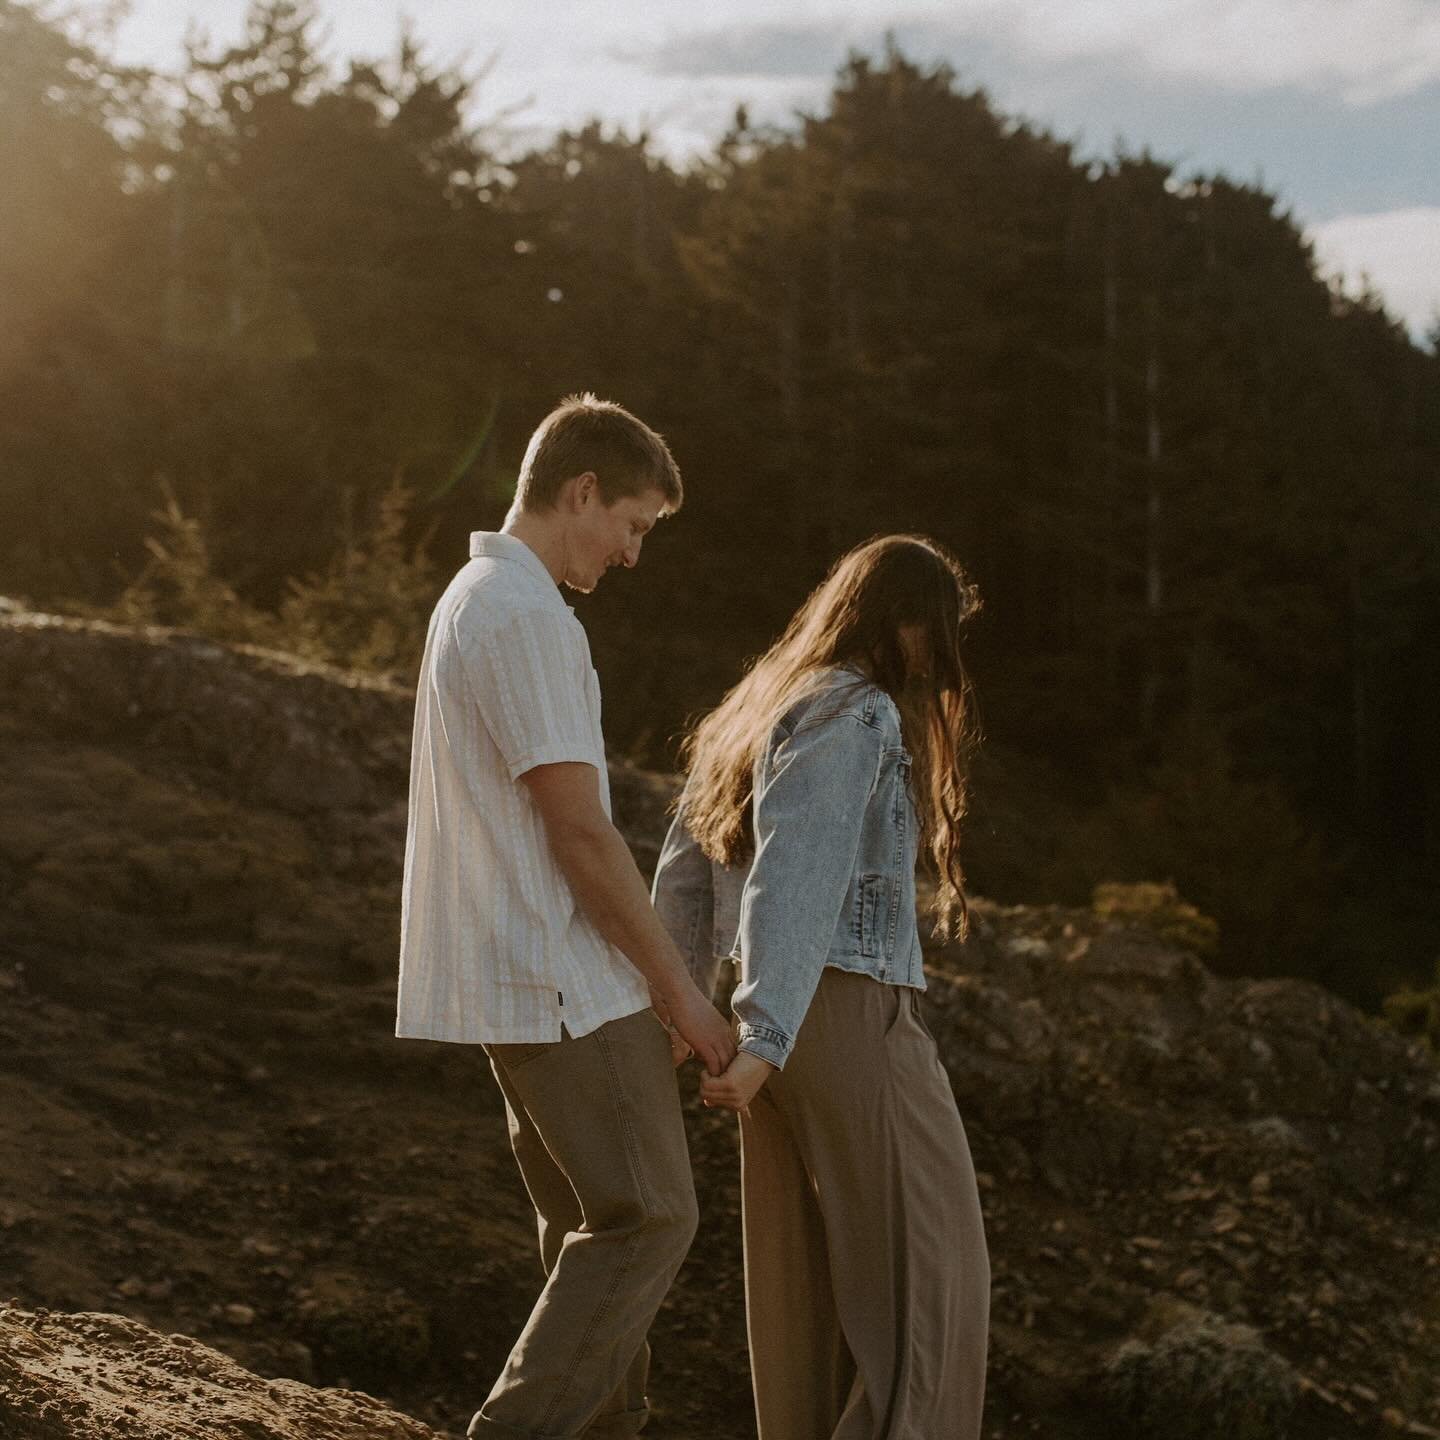 What a treat it is to start the morning exploring such beautiful places with quality people! I thoroughly enjoyed capturing these engagements for Tash and James. The creative flow that comes with the sunrise is truly special! Add in some epic Oregon 